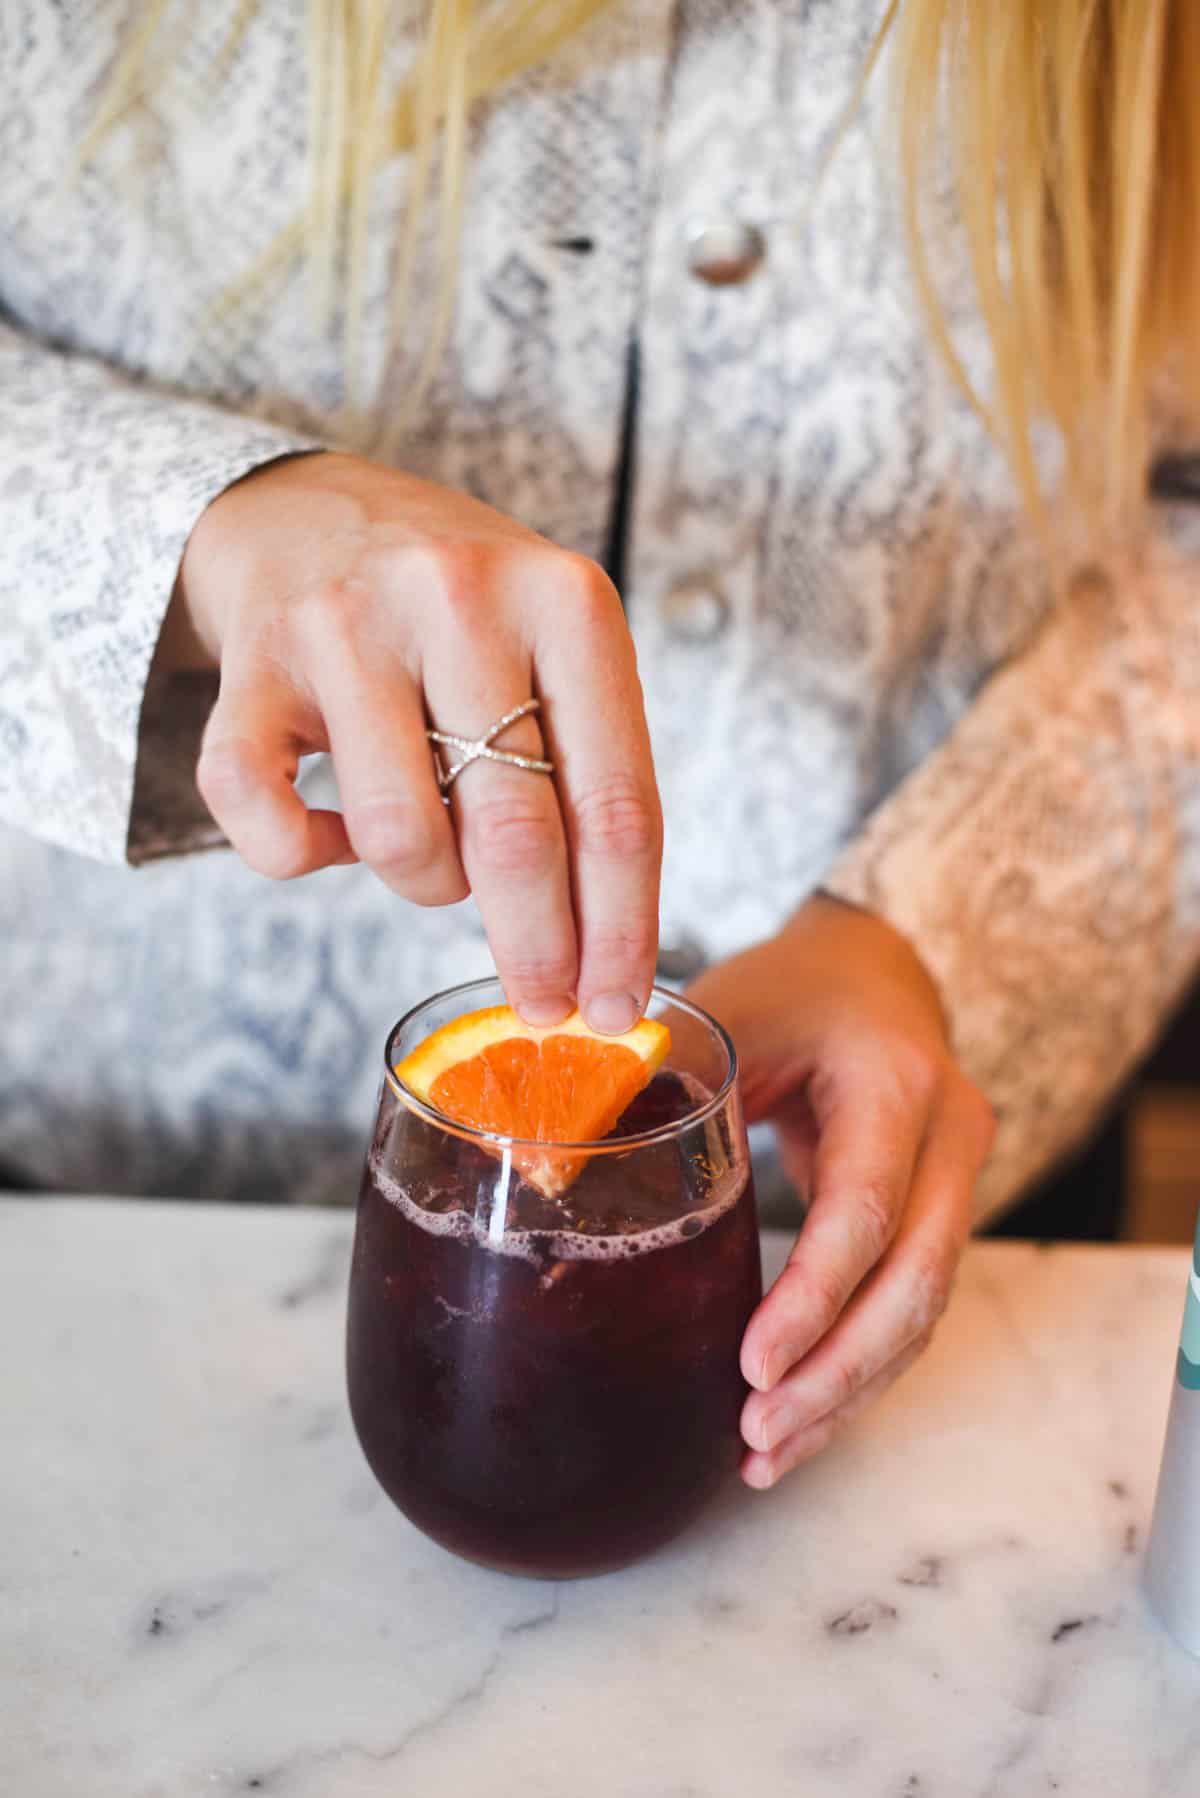 Woman adding a piece of orange to a red wine cocktail.